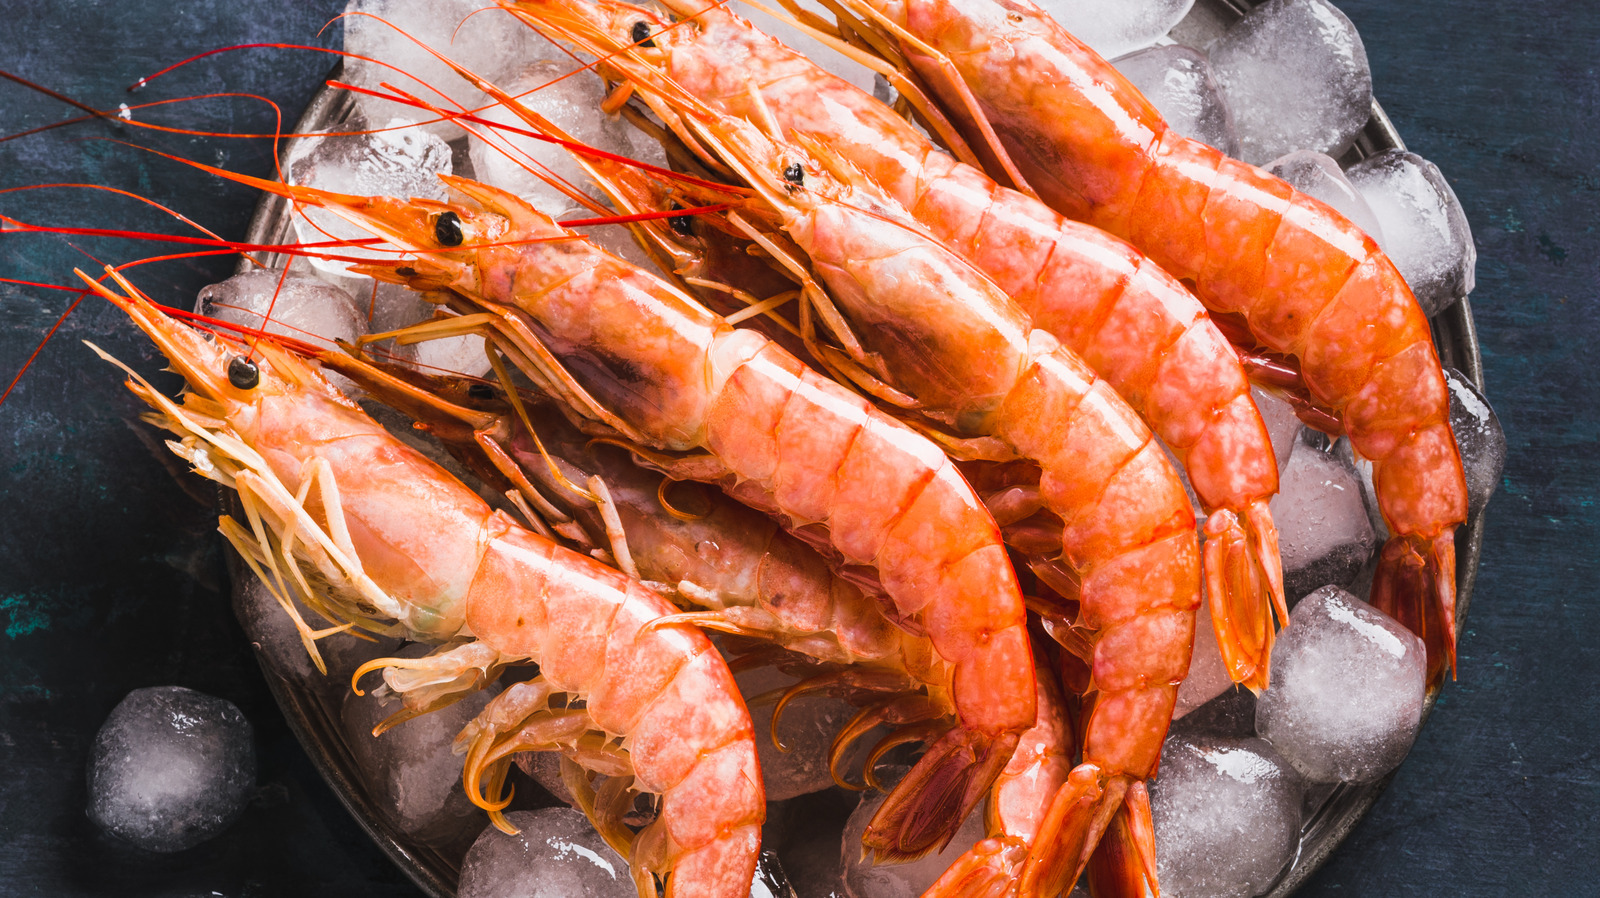 https://www.thedailymeal.com/img/gallery/whats-the-difference-between-shrimp-and-prawns/l-intro-1670966277.jpg